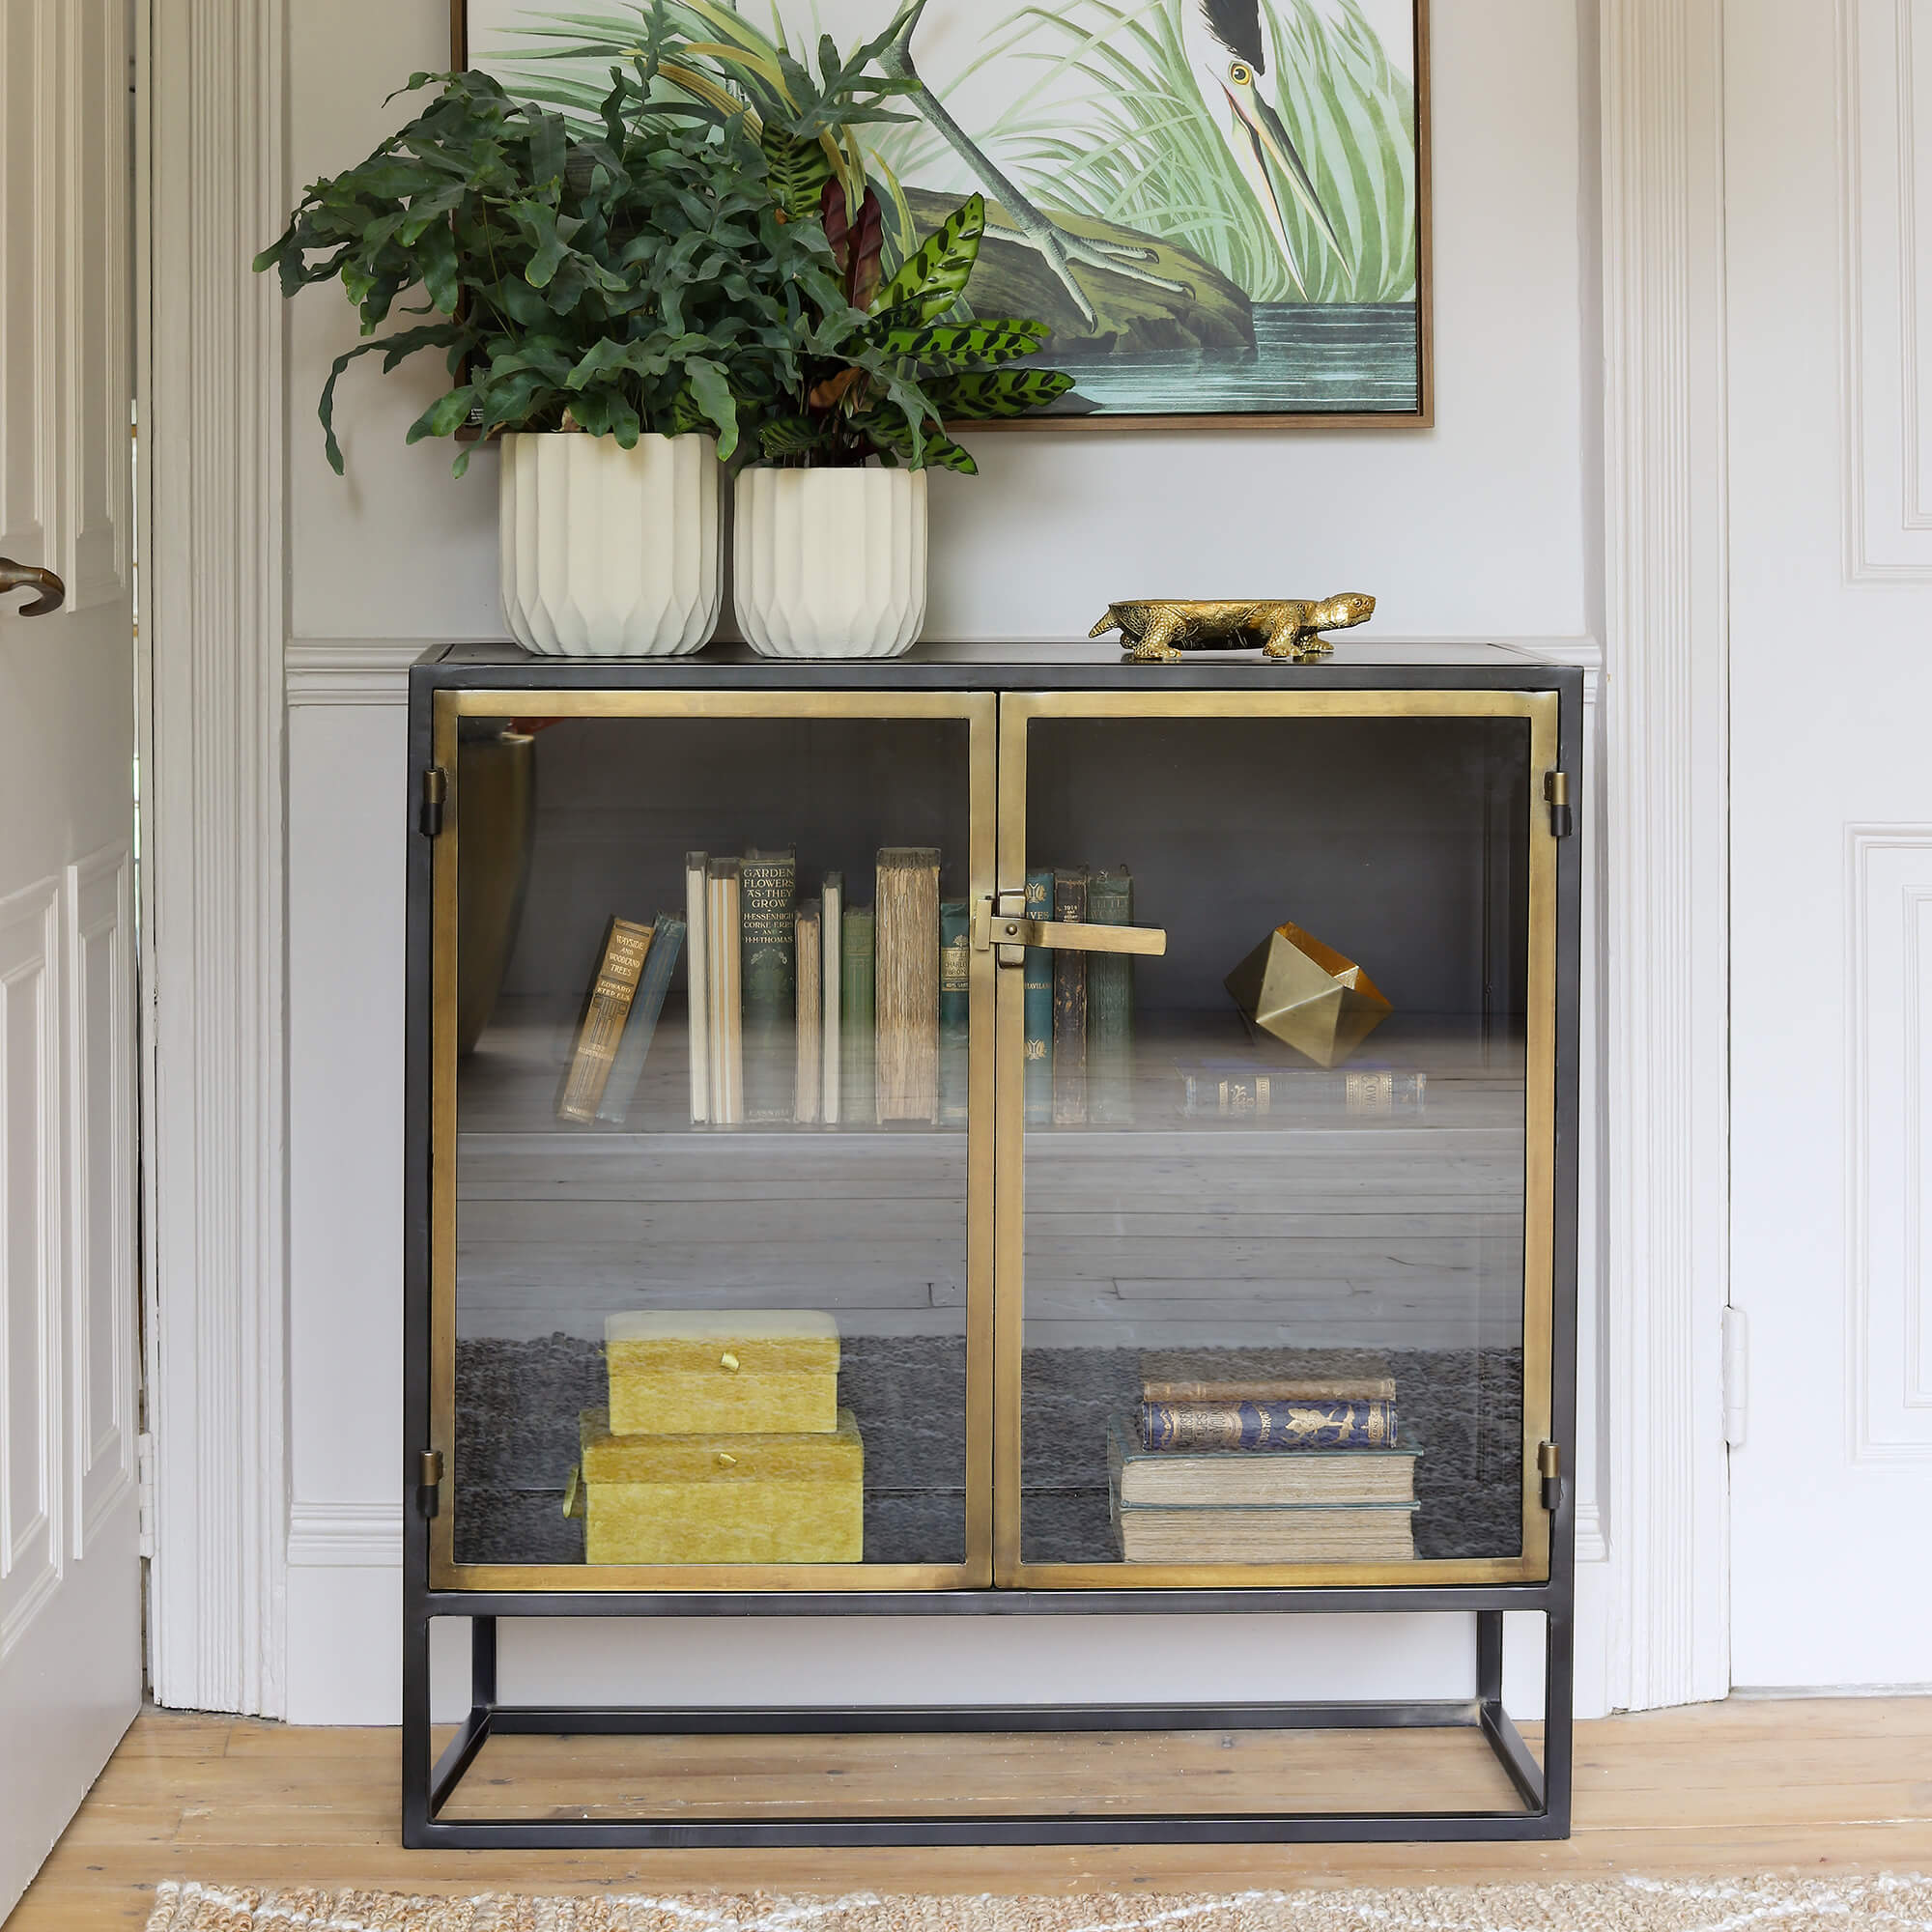 Read more about Graham and green dexter glass sideboard